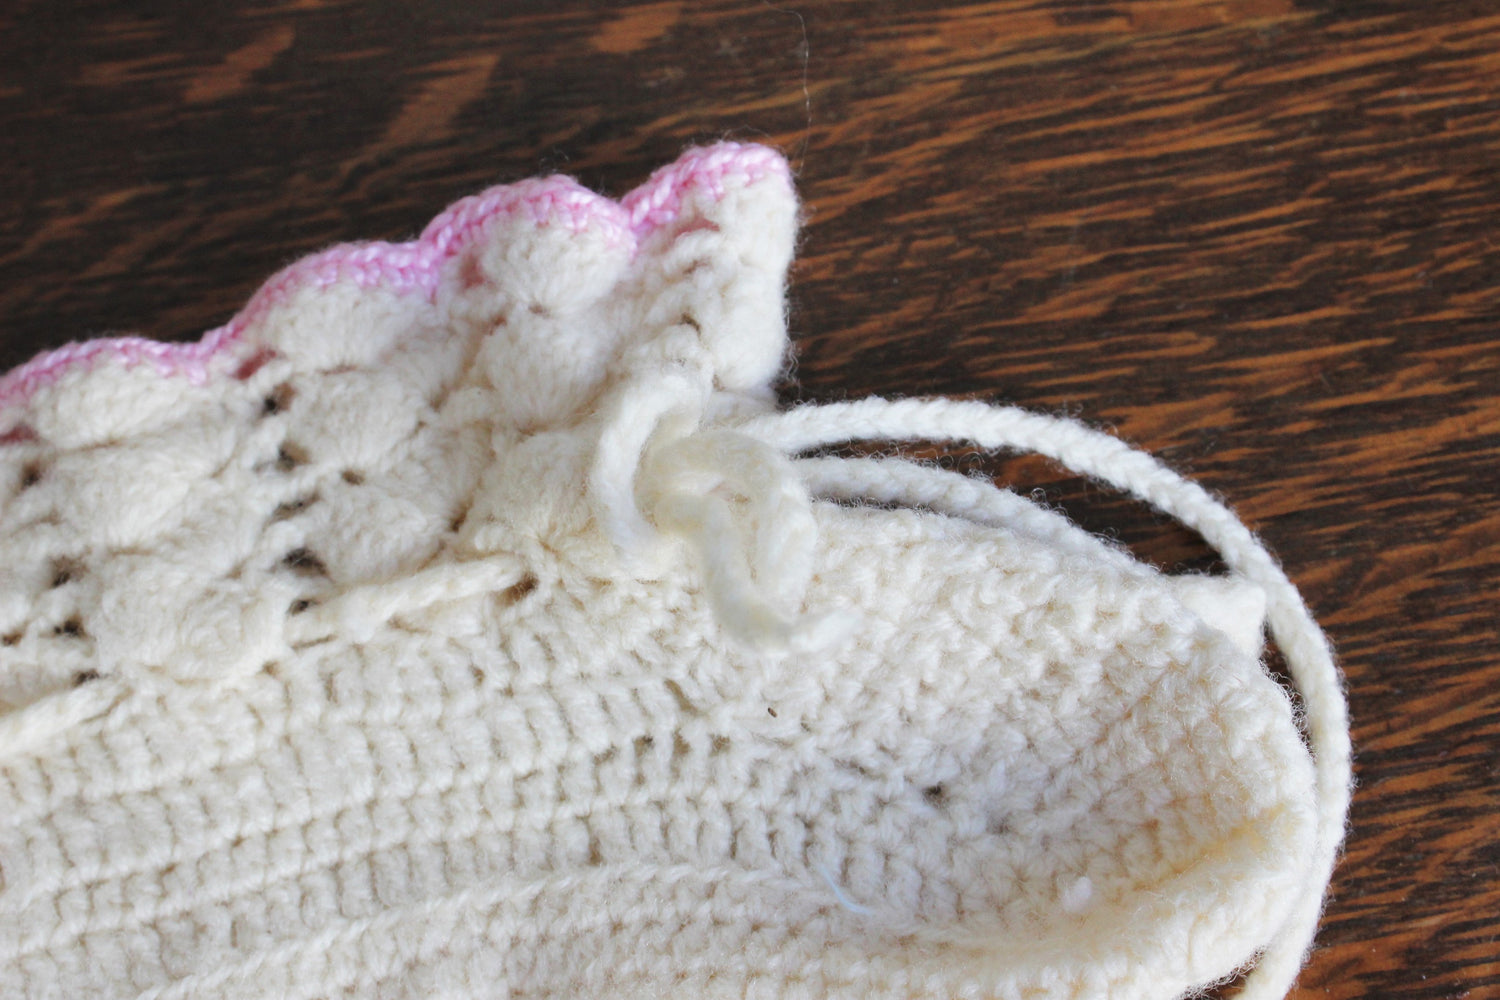 Vintage 1950s Baby Booties / Infant Girls Crochet Ivory With Pink Trim